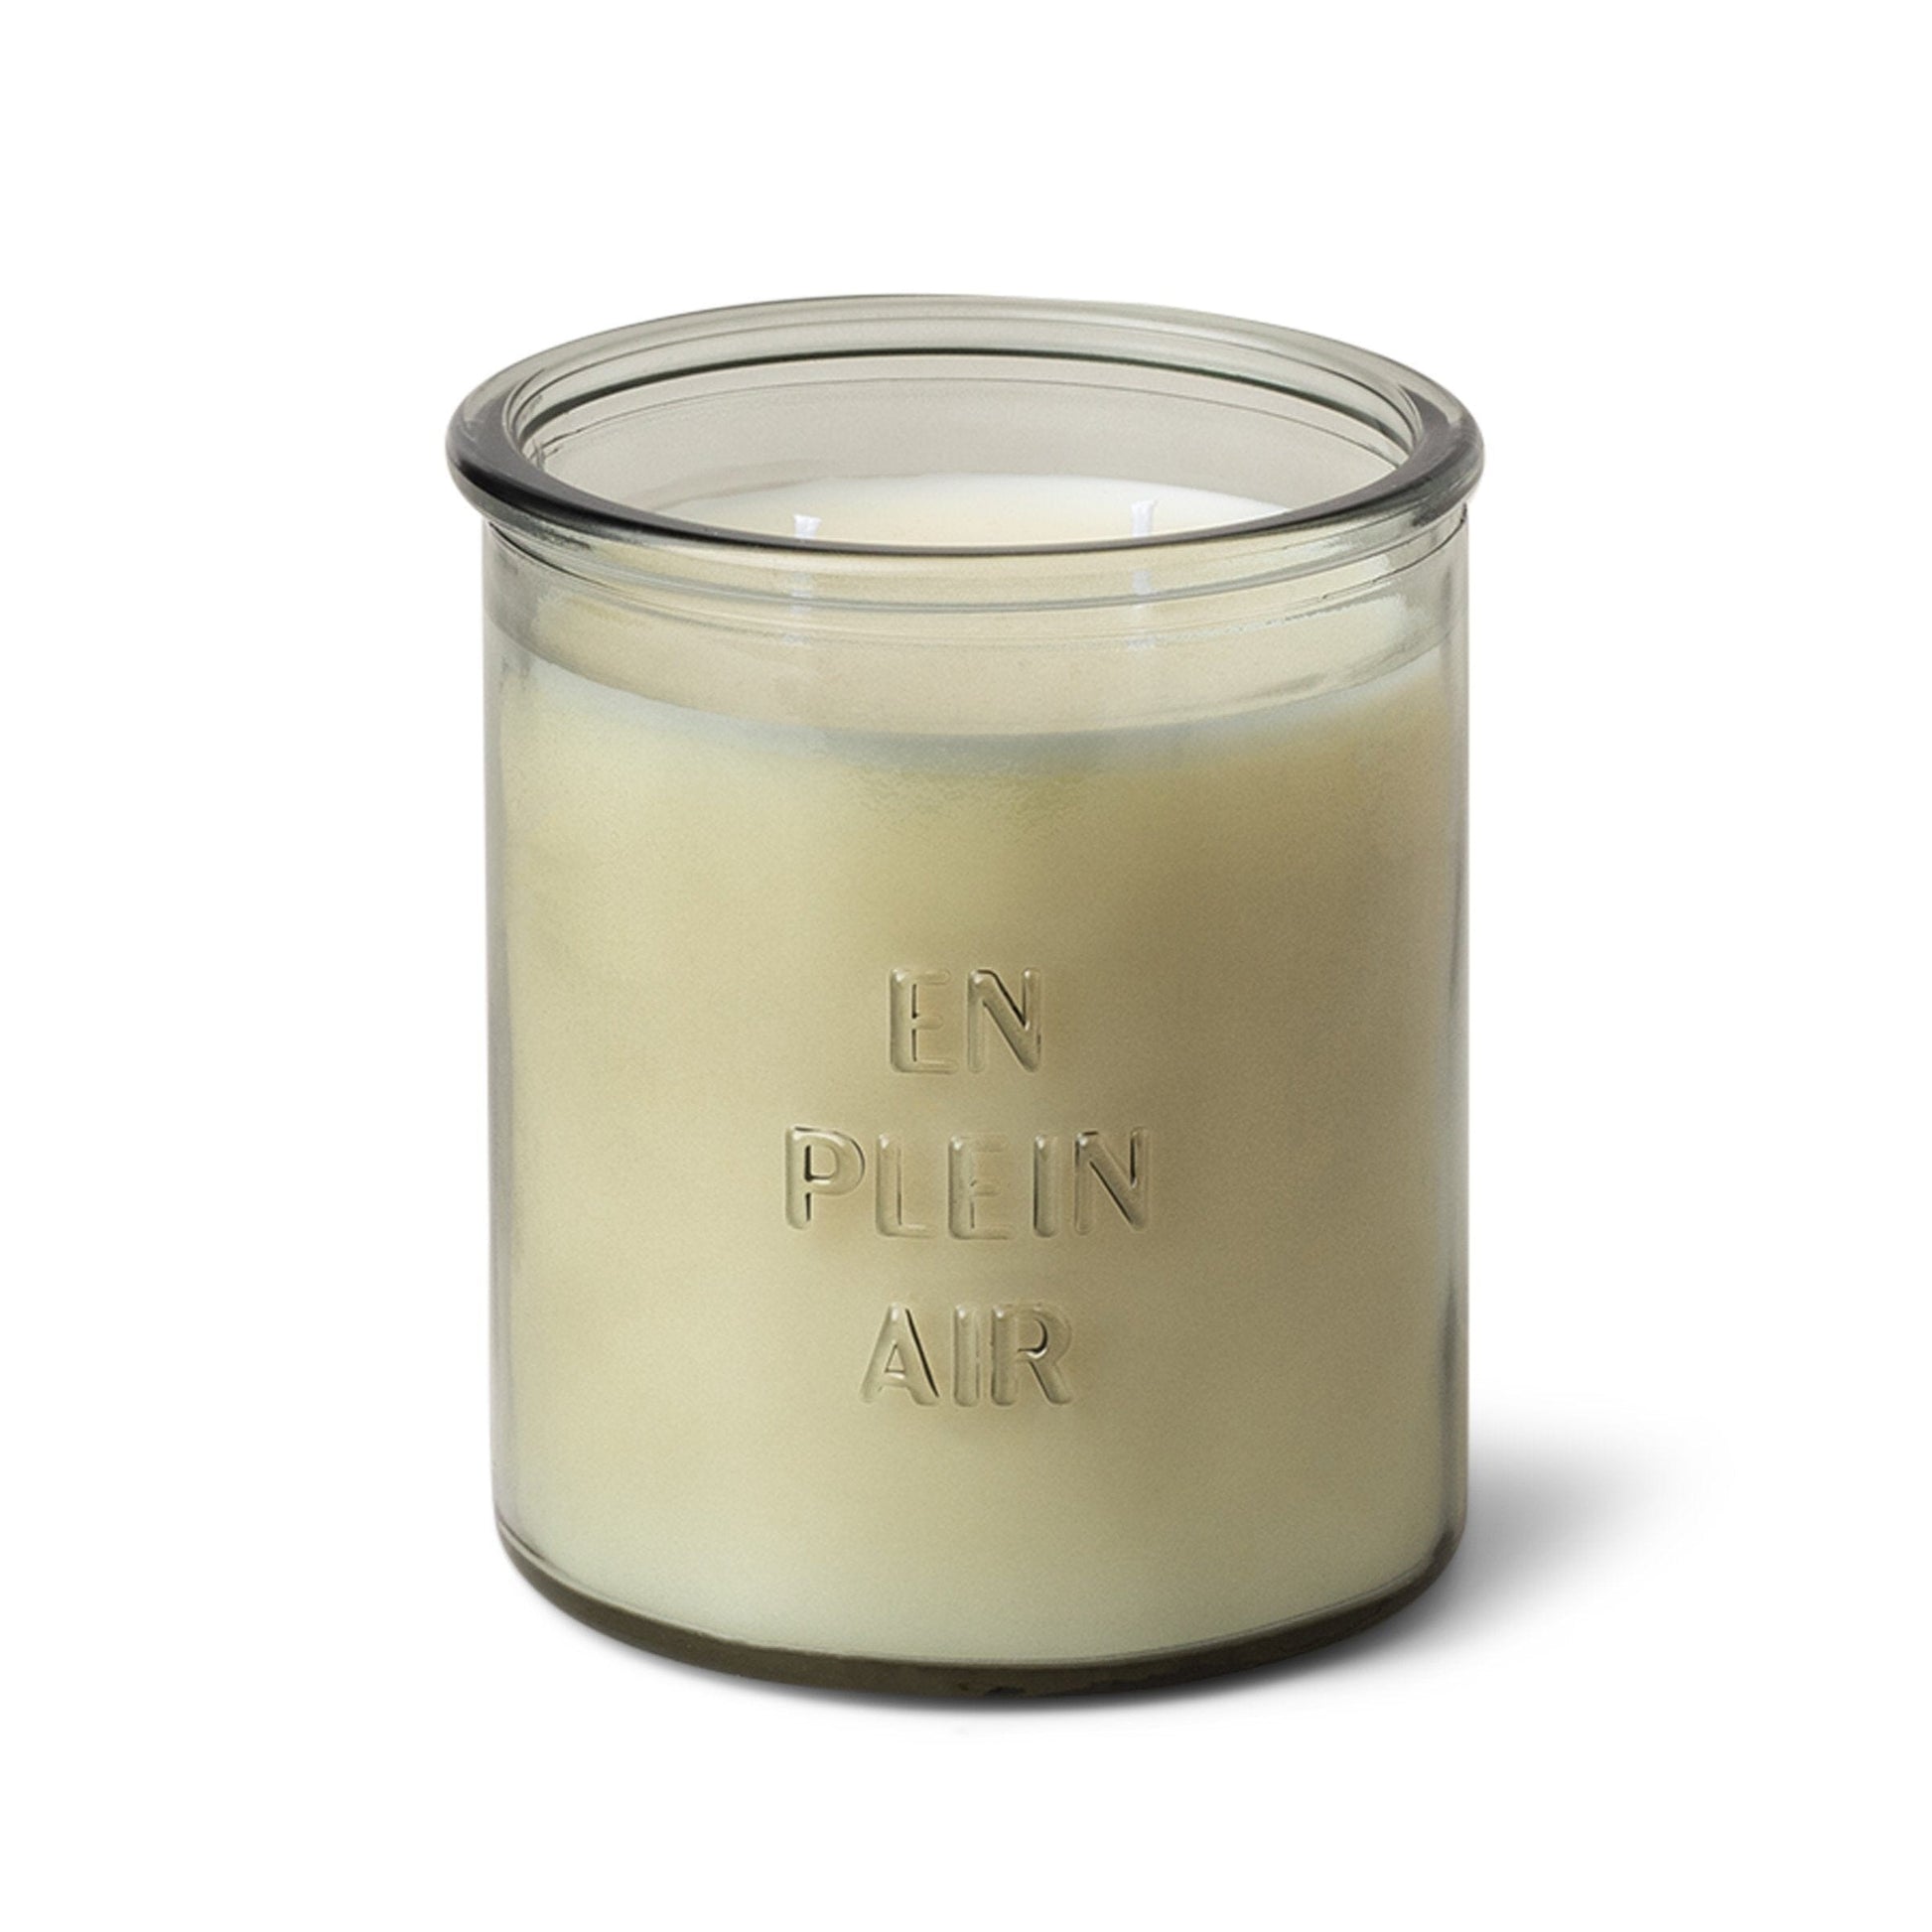 Clear glass candle with "En Plein Air" as raised text on the glass, white soy wax inside, and two cotton wicks on white background